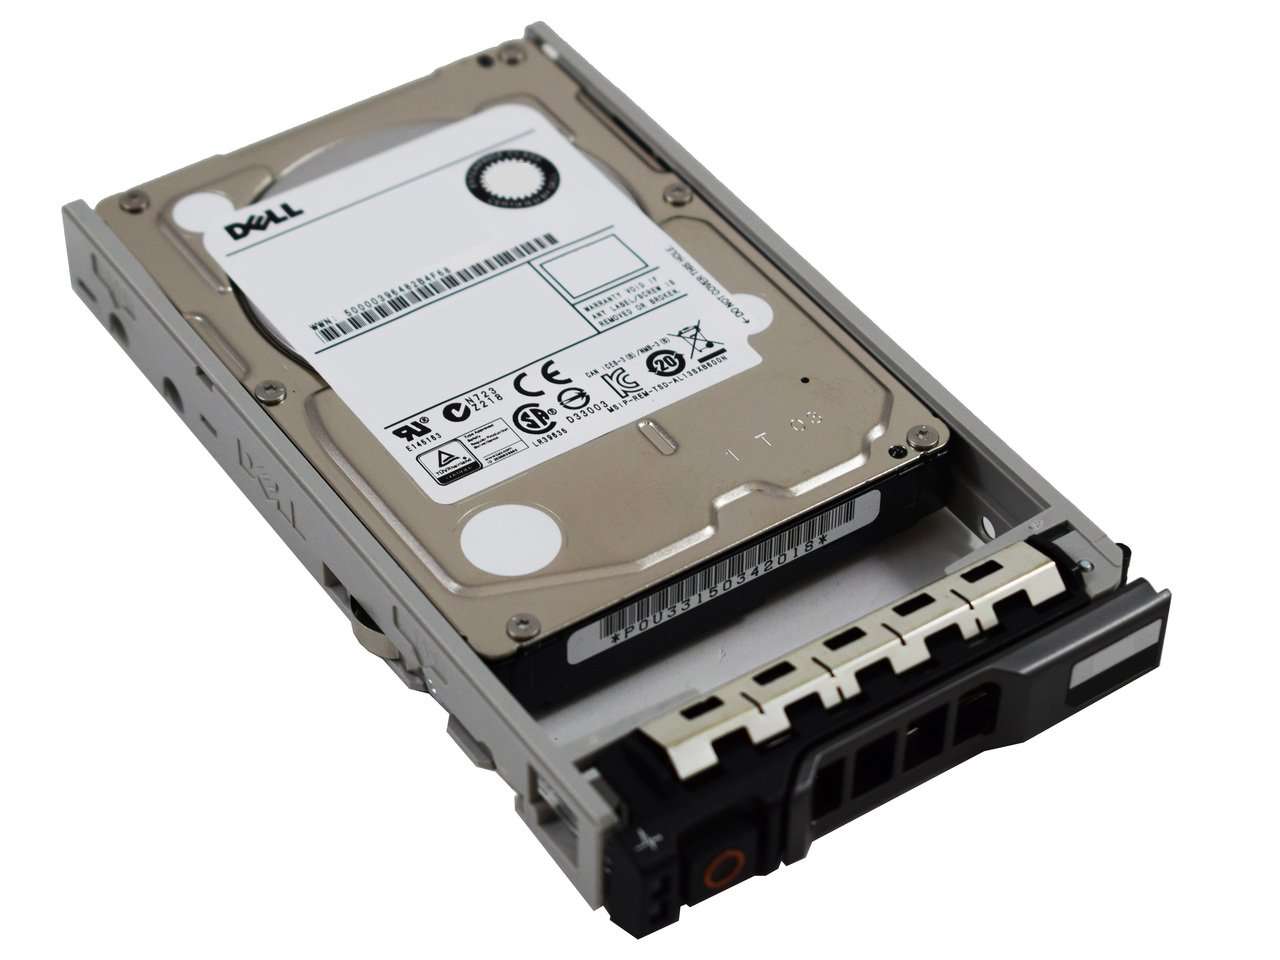 Dell G13 VHWWK 600GB 15K RPM SAS 12Gb/s 512n 2.5" Manufacturer Recertified HDD